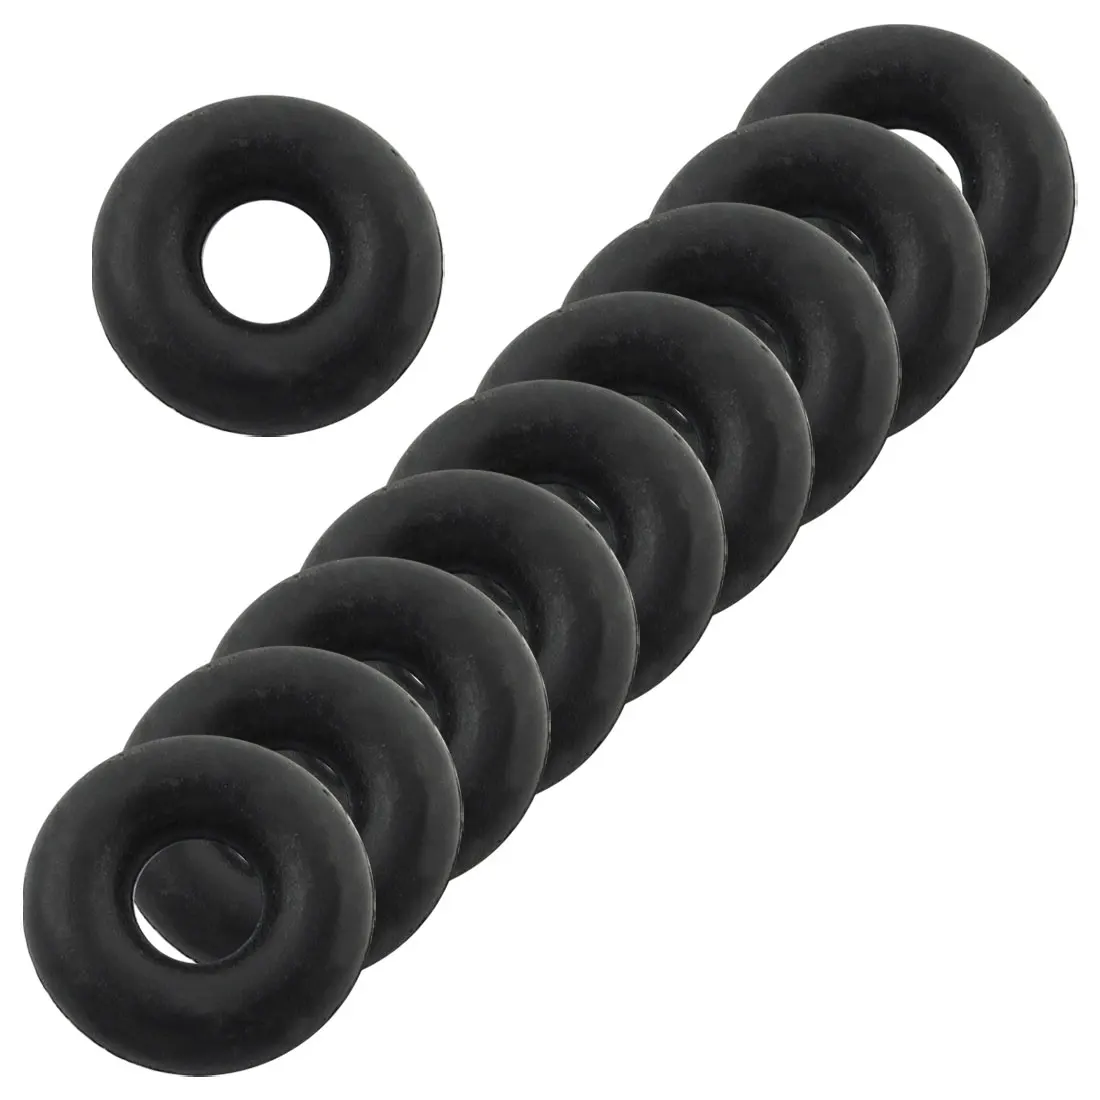 

Uxcell 10 Pcs 3Mm Black Thickness Rubber Oil Filter Seal Gasket O Rings Id . | 10mm | 11mm | 4.5mm | 4mm | 5mm | 6mm | 7mm | 8mm